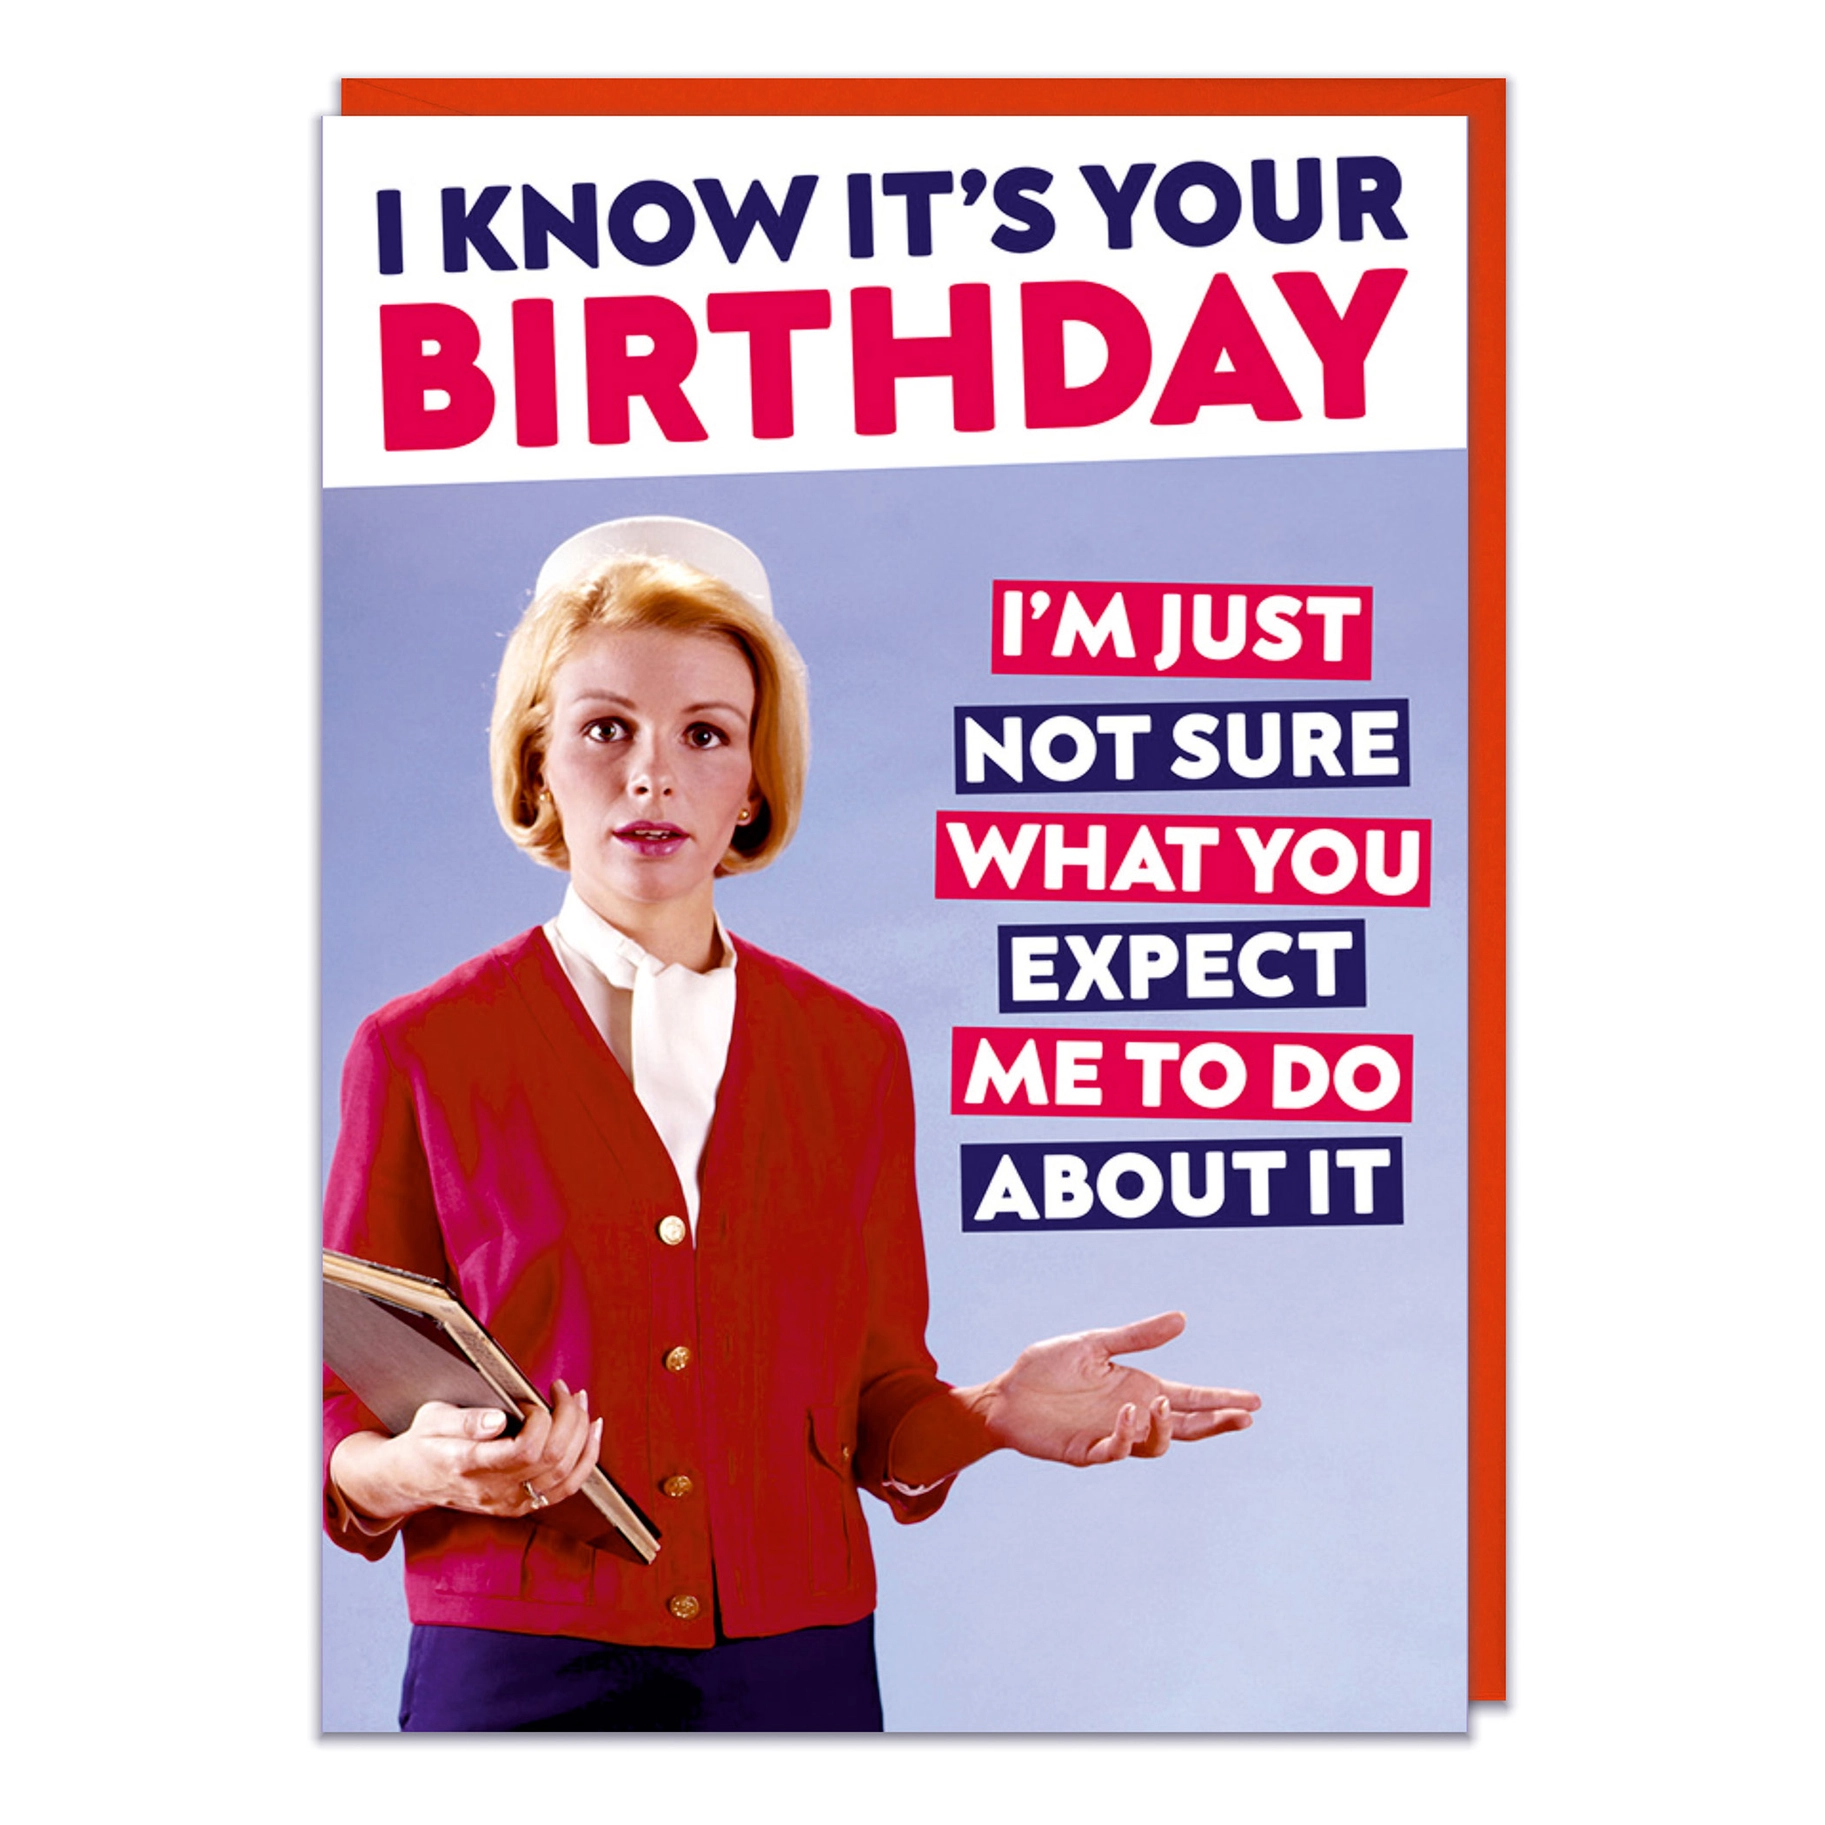 I Know It's Your Birthday I'm Just Not Sure What You Expect Me To Do About It - Birthday Greeting Card - Mellow Monkey